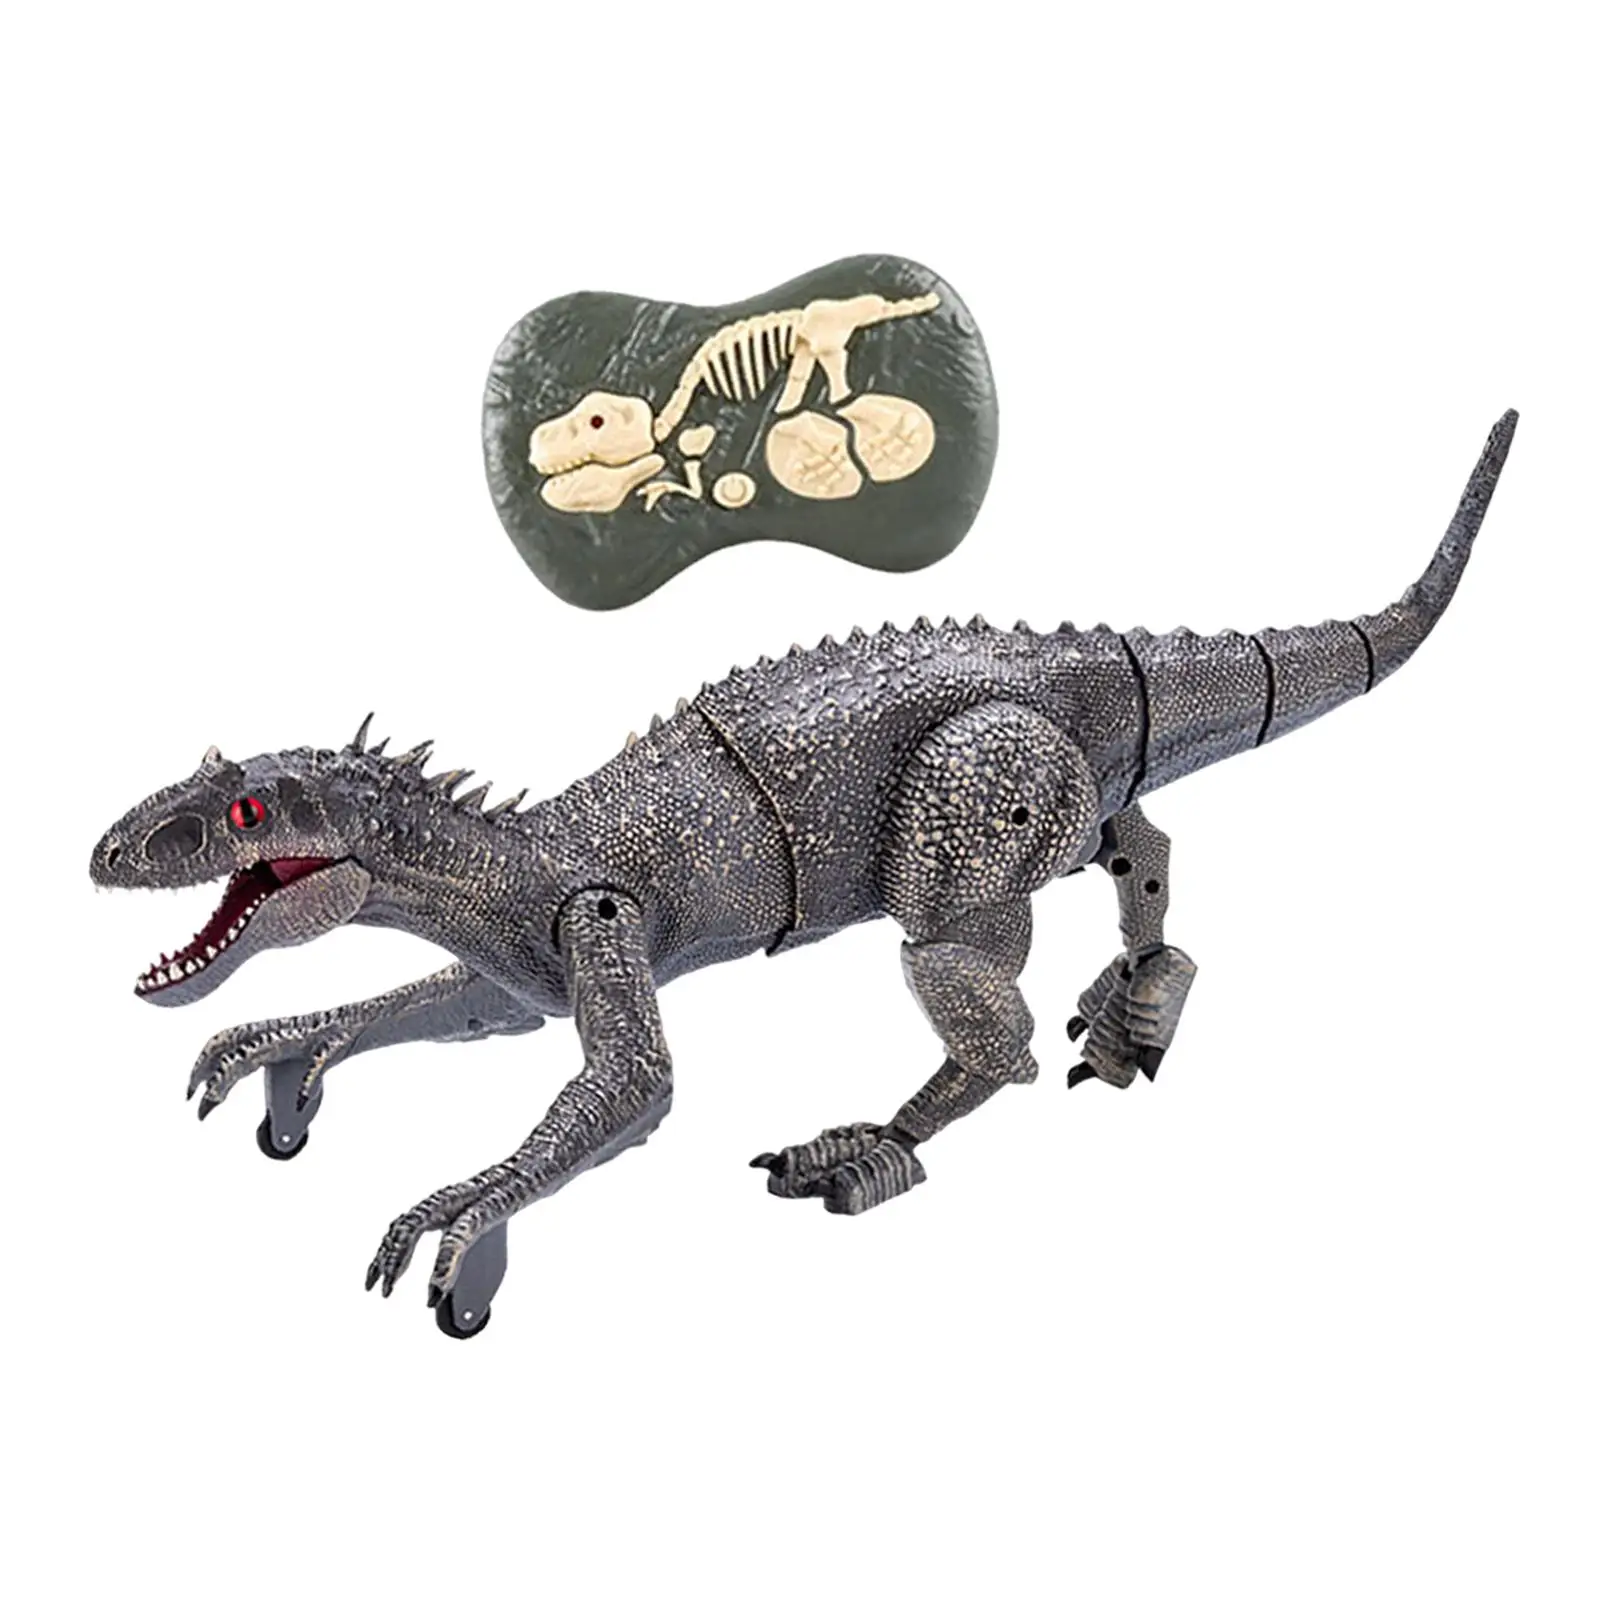  RC Dinosaur Toys Walking Movement with Glowing Eyes for Boys Kids Toys Birthday Gifts